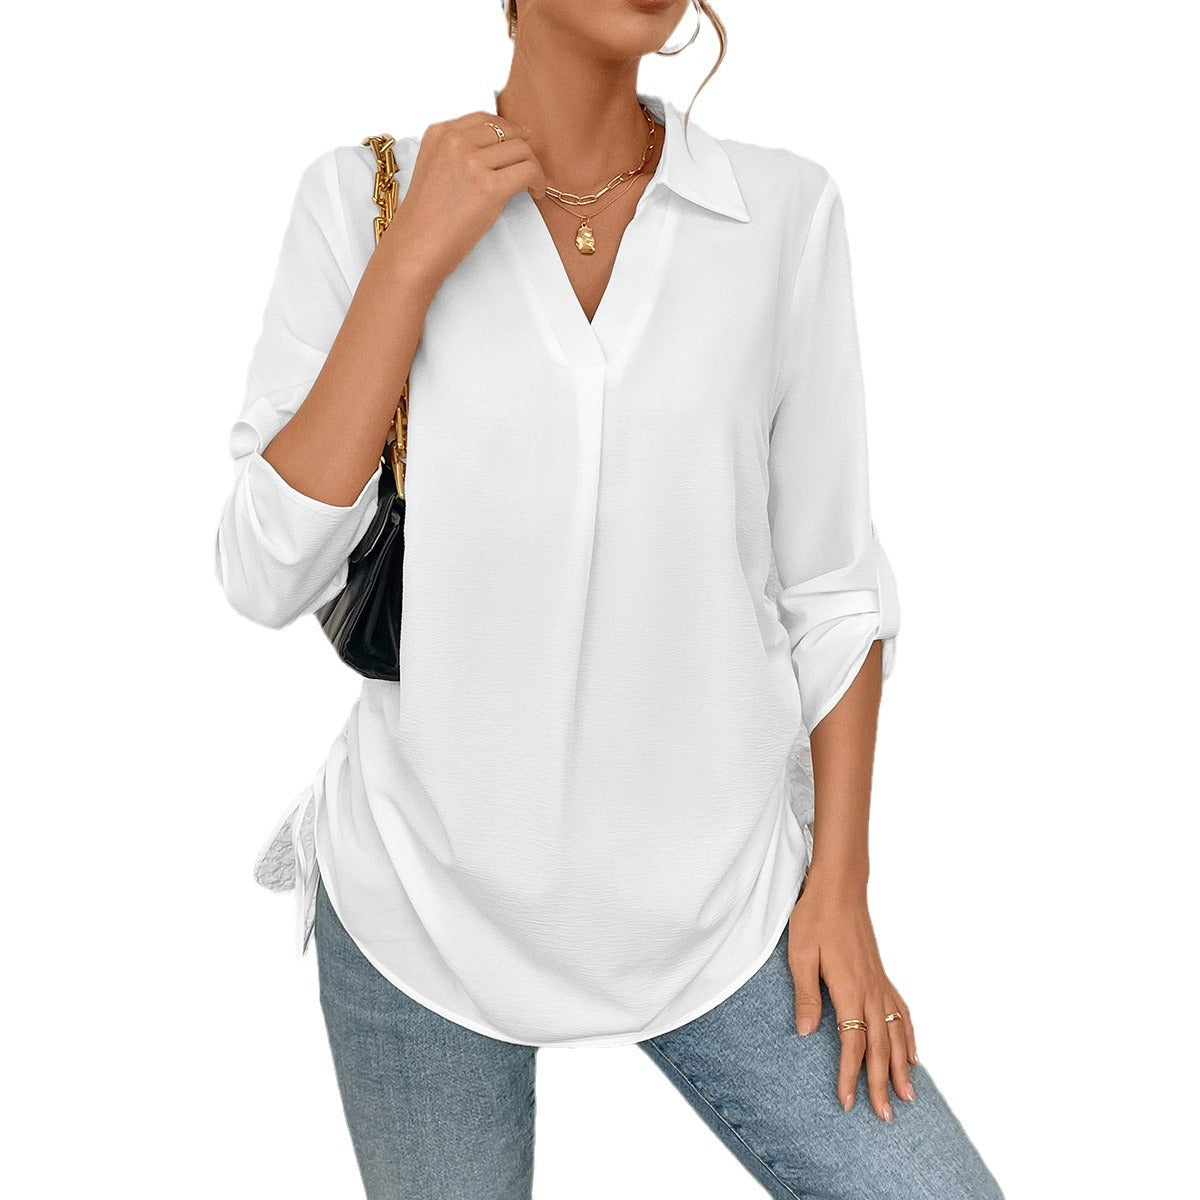 Women's Two Sides Drawstring Solid Color Shirt Beach Blouses